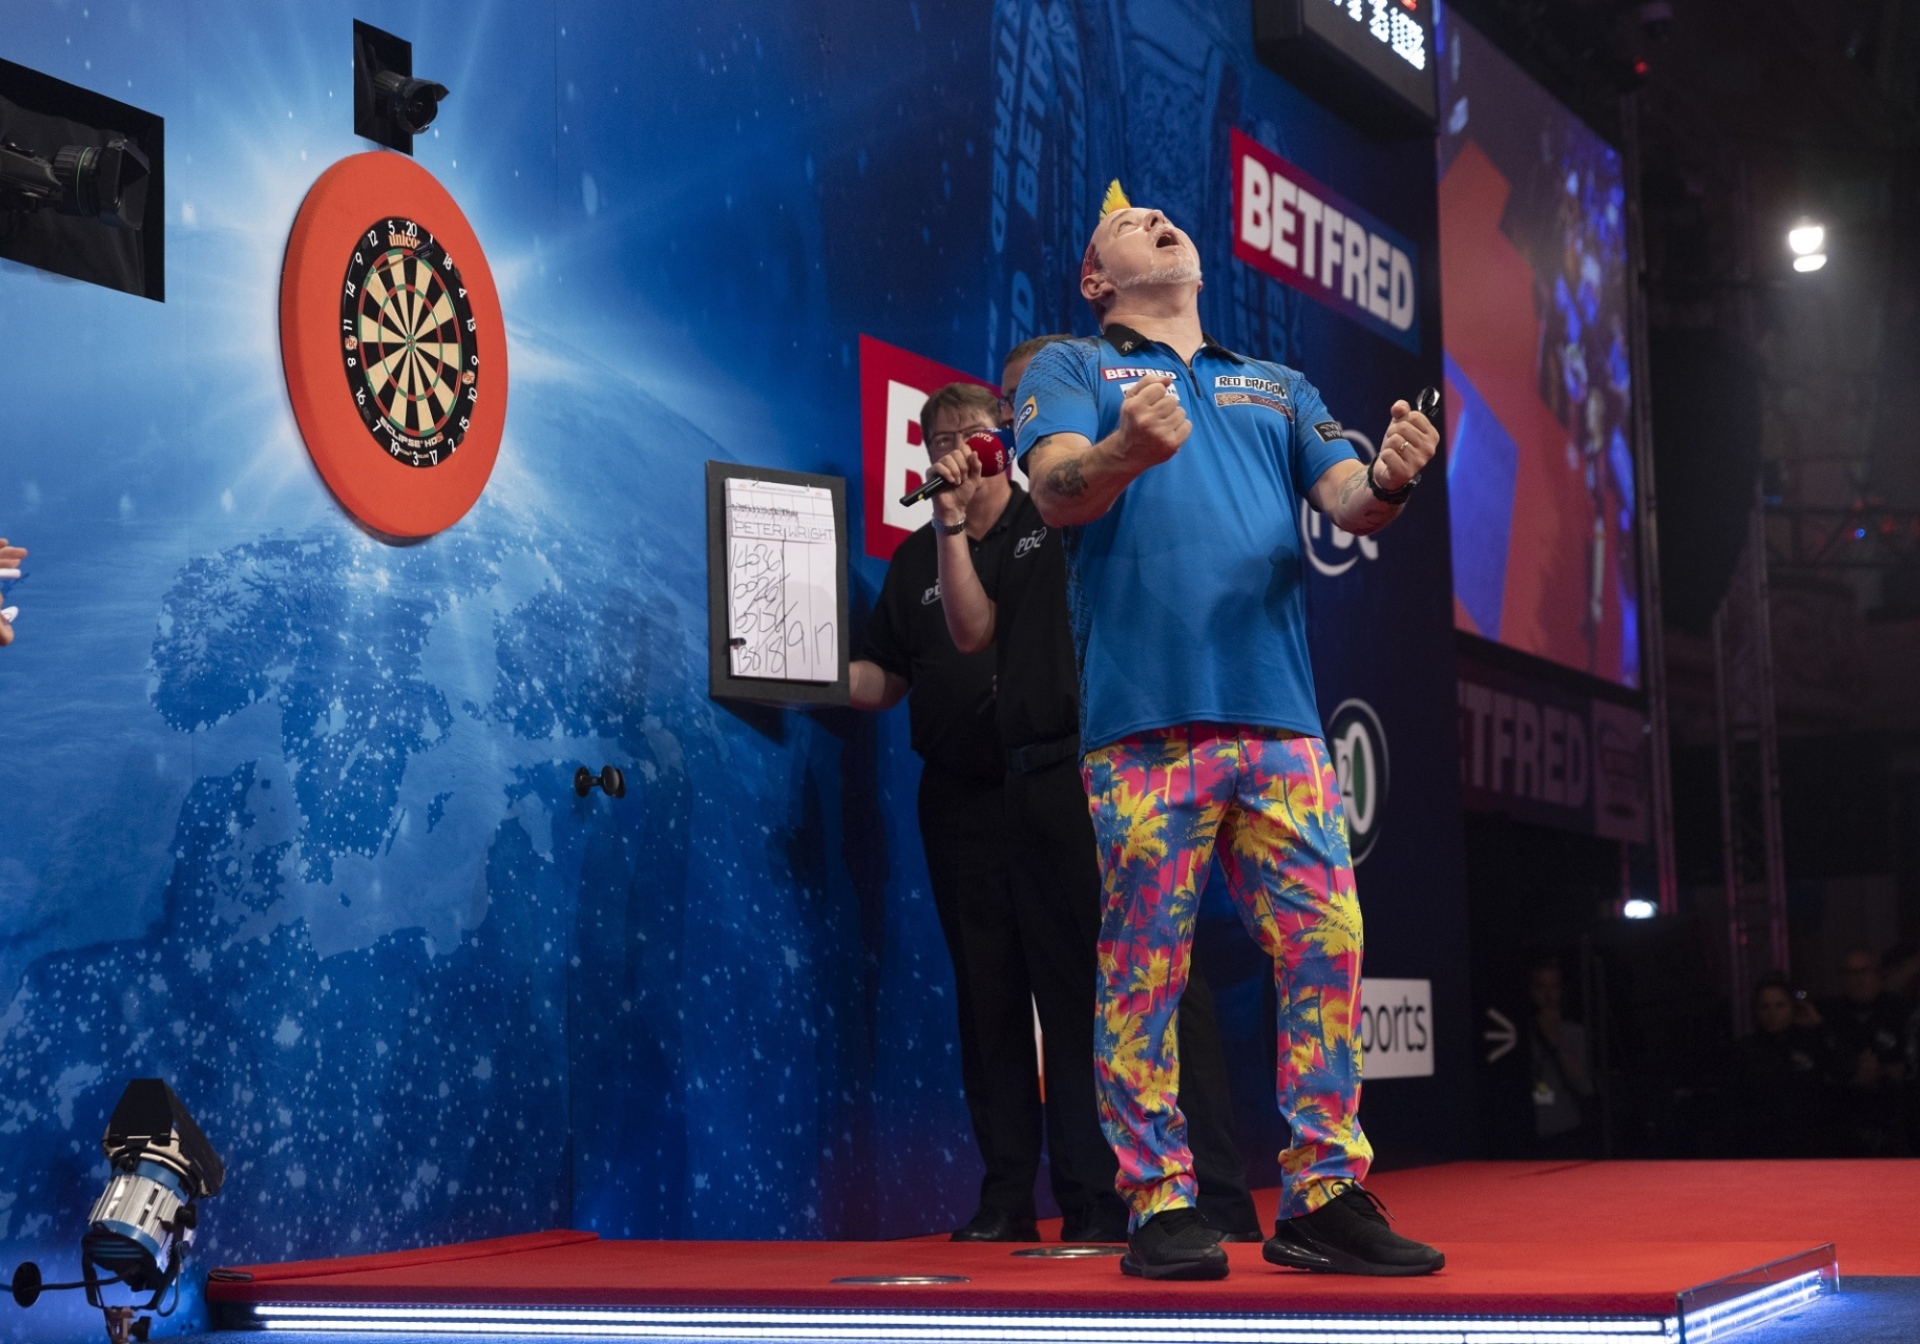 Peter Wright - Betfred World Matchplay final (Lawrence Lustig, PDC)